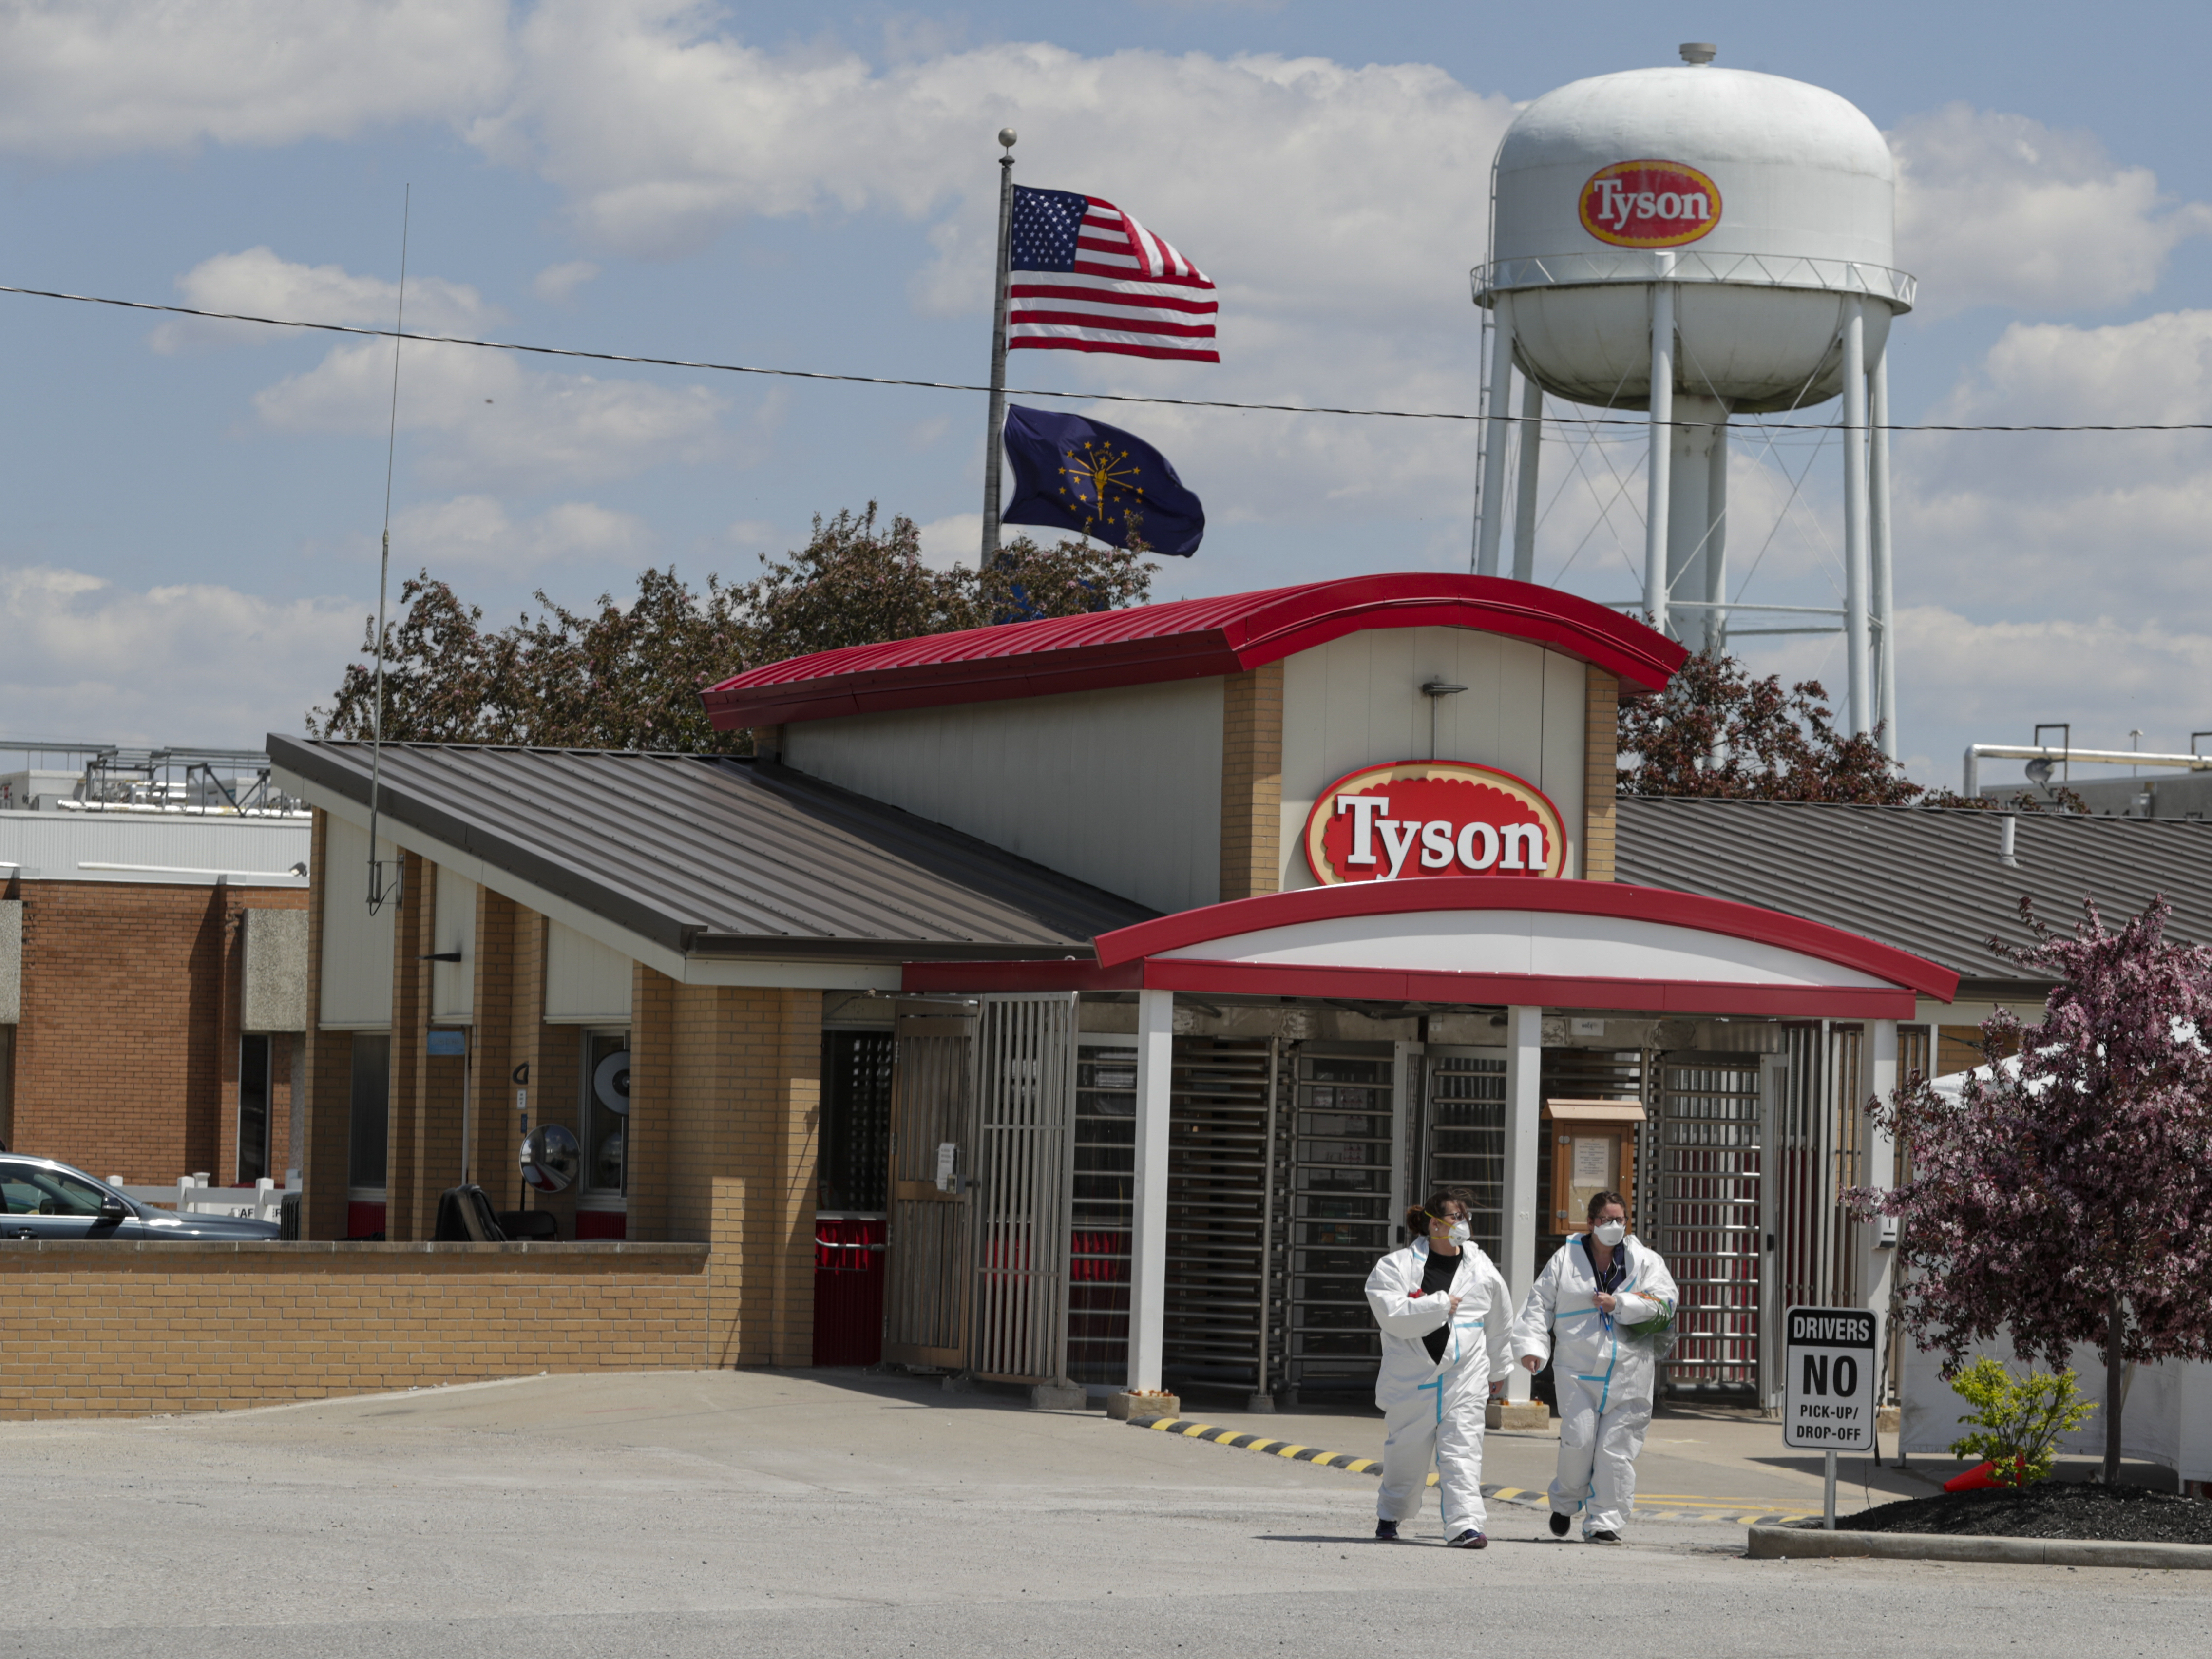 Workers are shown leaving the Tyson Foods pork processing plant in Logansport, Ind., in May. A House subcommittee is investigating the Trump administration's handling of COVID-19 outbreaks at meatpacking plants, focusing on the Occupational Safety and Health Administration as well as major companies Tyson, Smithfield and JBS. CREDIT: Michael Conroy/AP